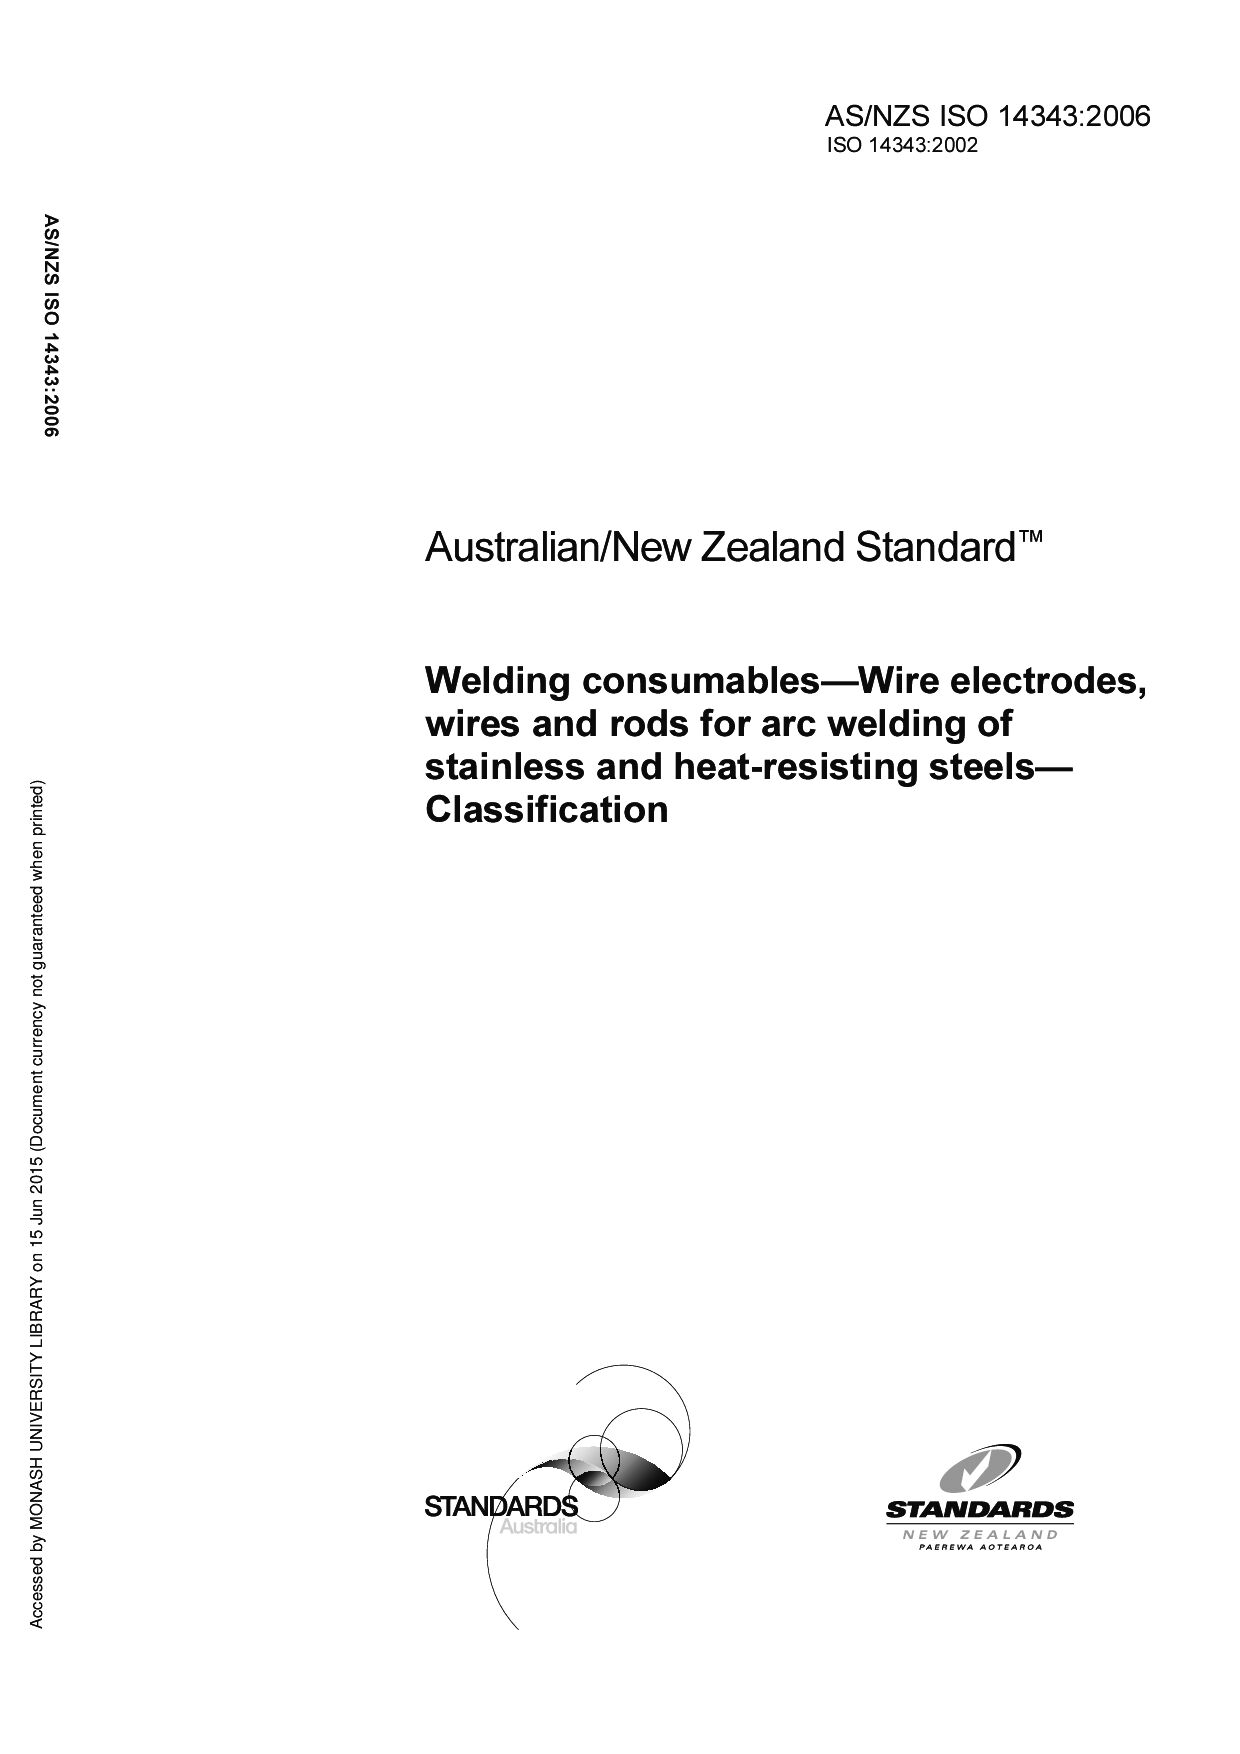 AS/NZS ISO 14343:2006